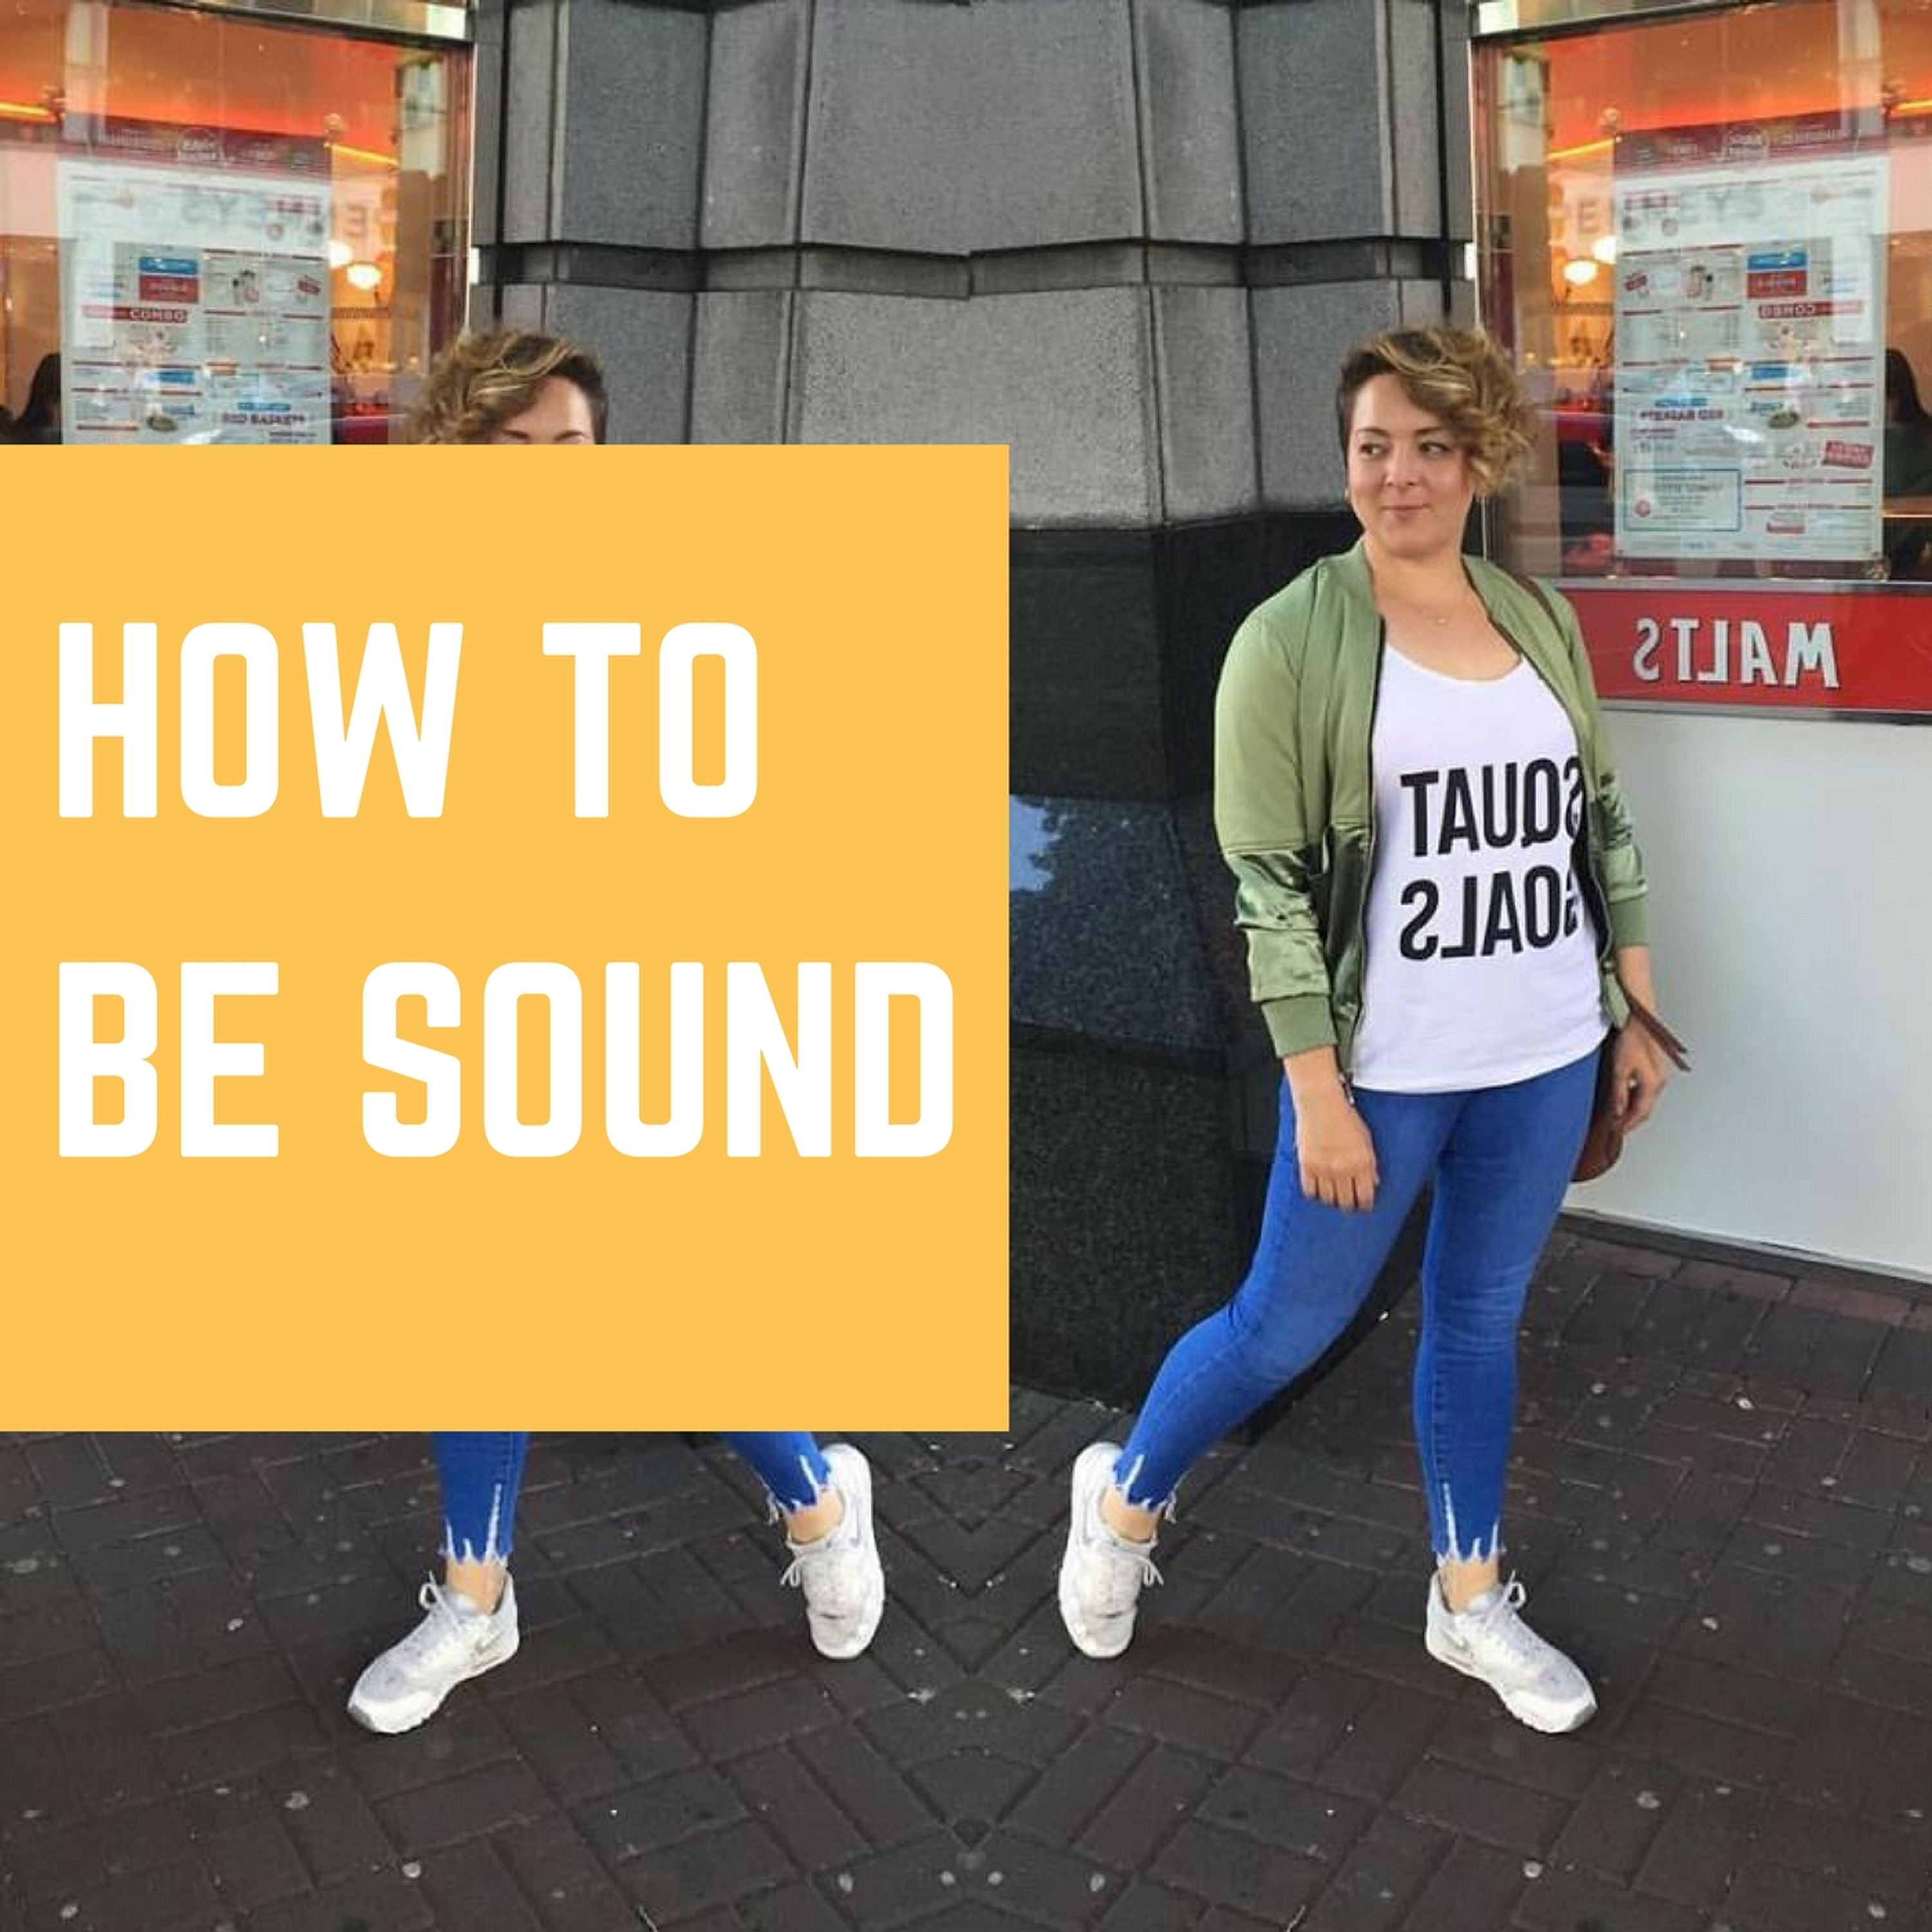 Rebecca Flynn on how to be sound